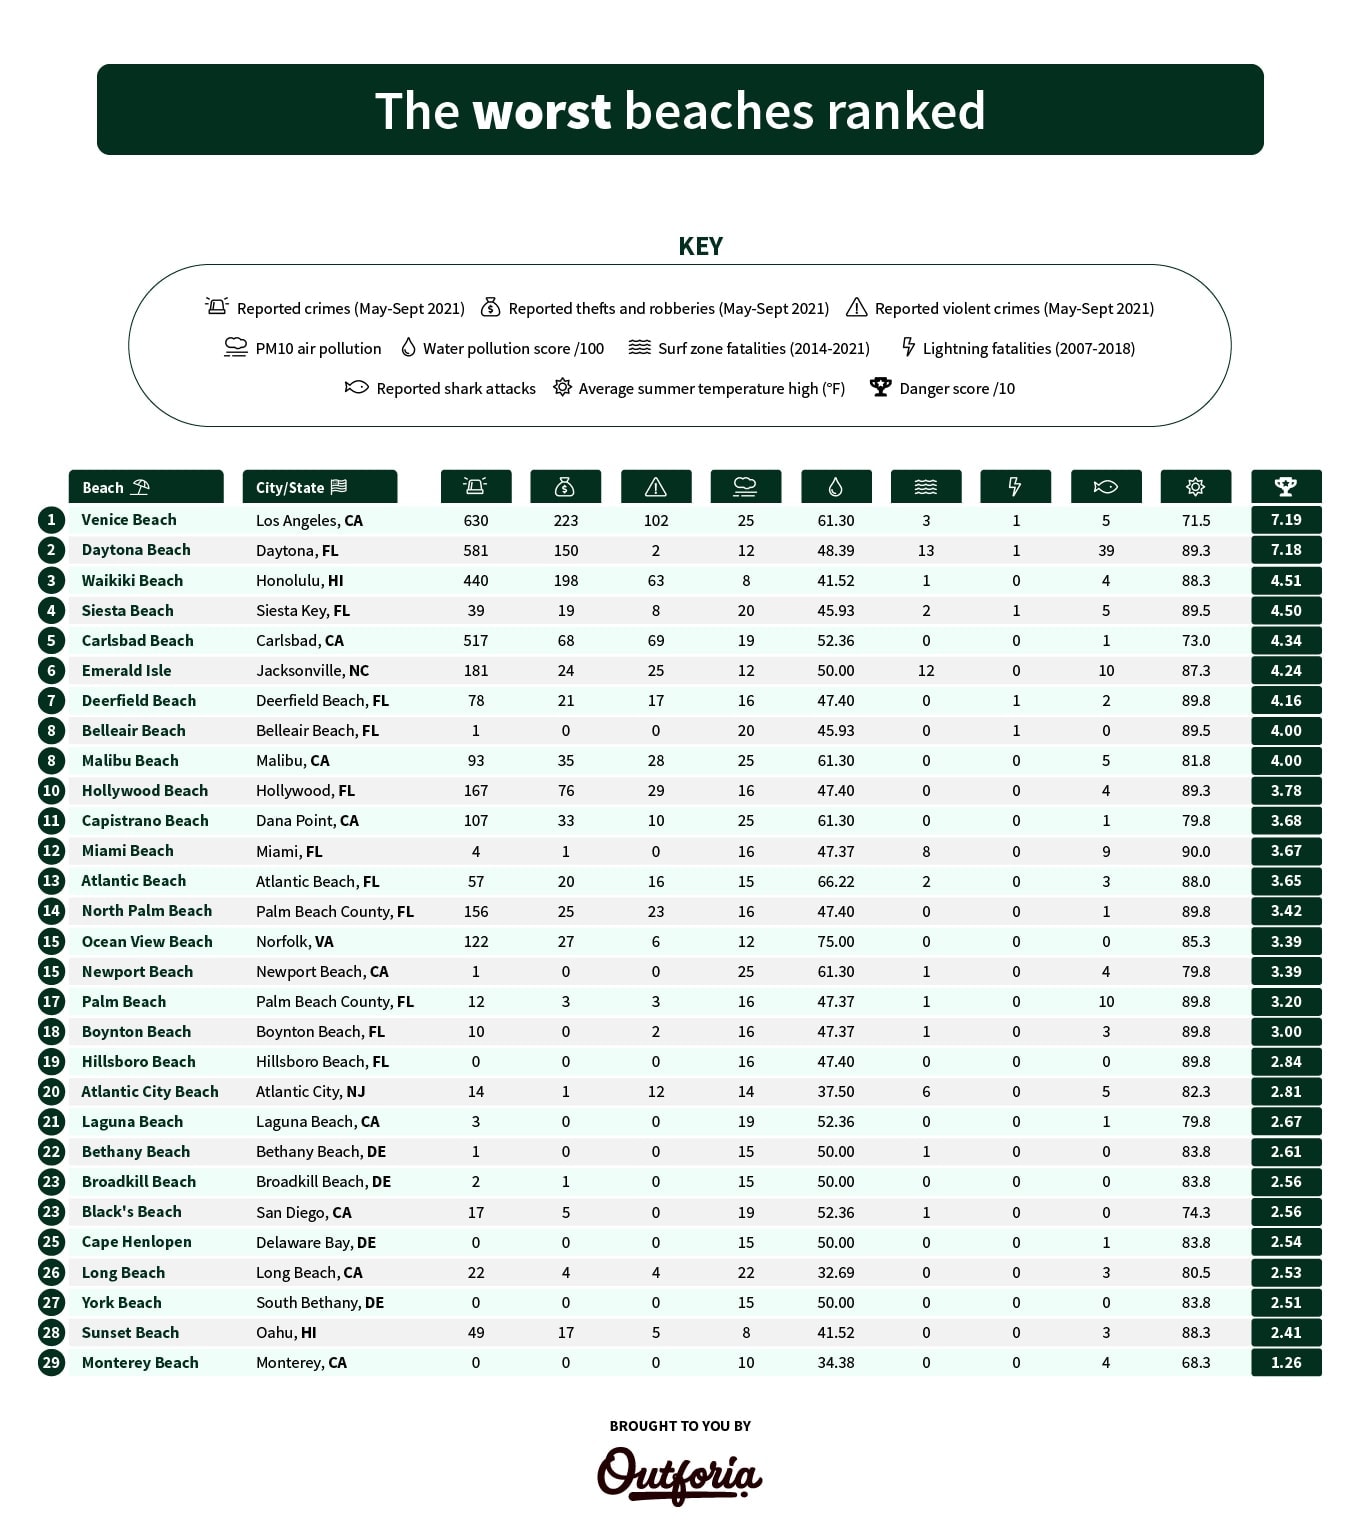 Dangerous coasts and worst beaches ranked infographic